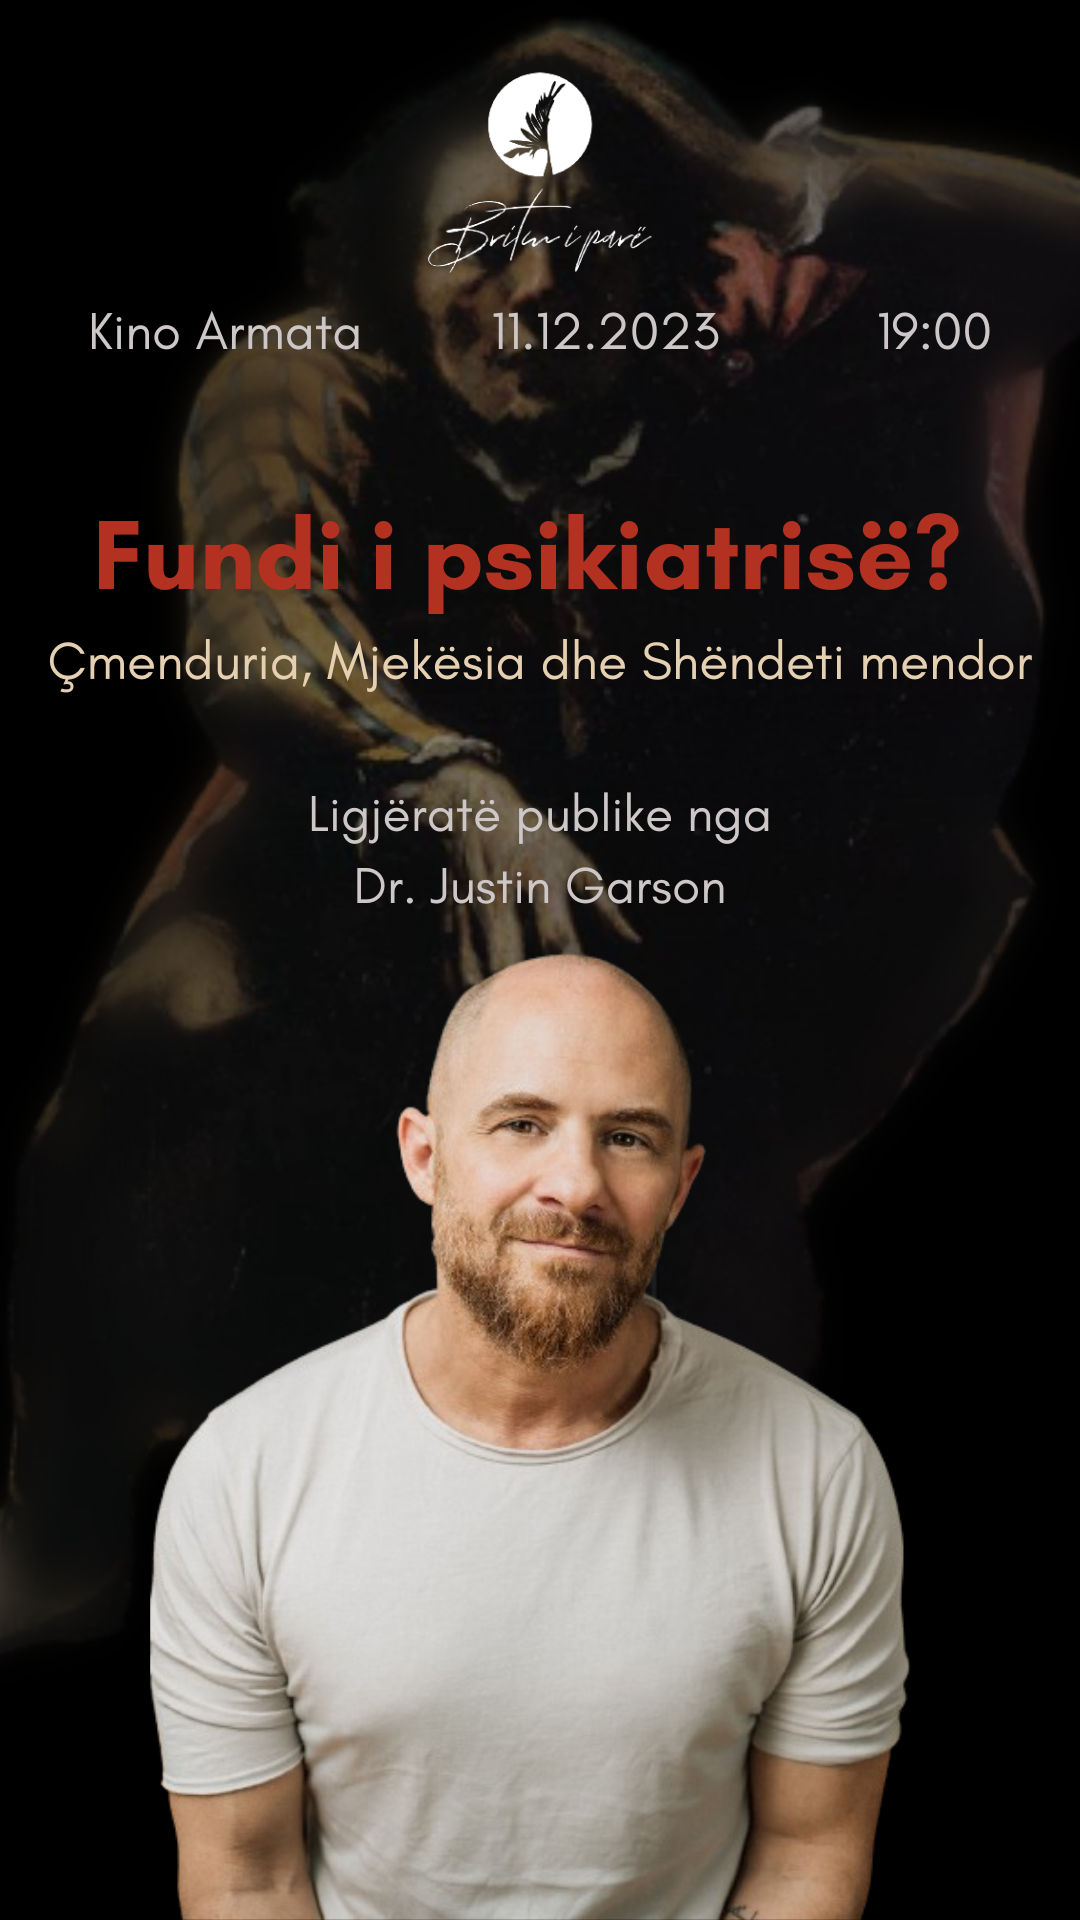    The End of Psychiatry: Madness, Medicine, and Mental Health    December 11, 2023  A presentation at the  Britm i parë  Institute in Pristina, Kosovo, on rethinking madness outside the medical model. The talk will be livestreamed  here . 